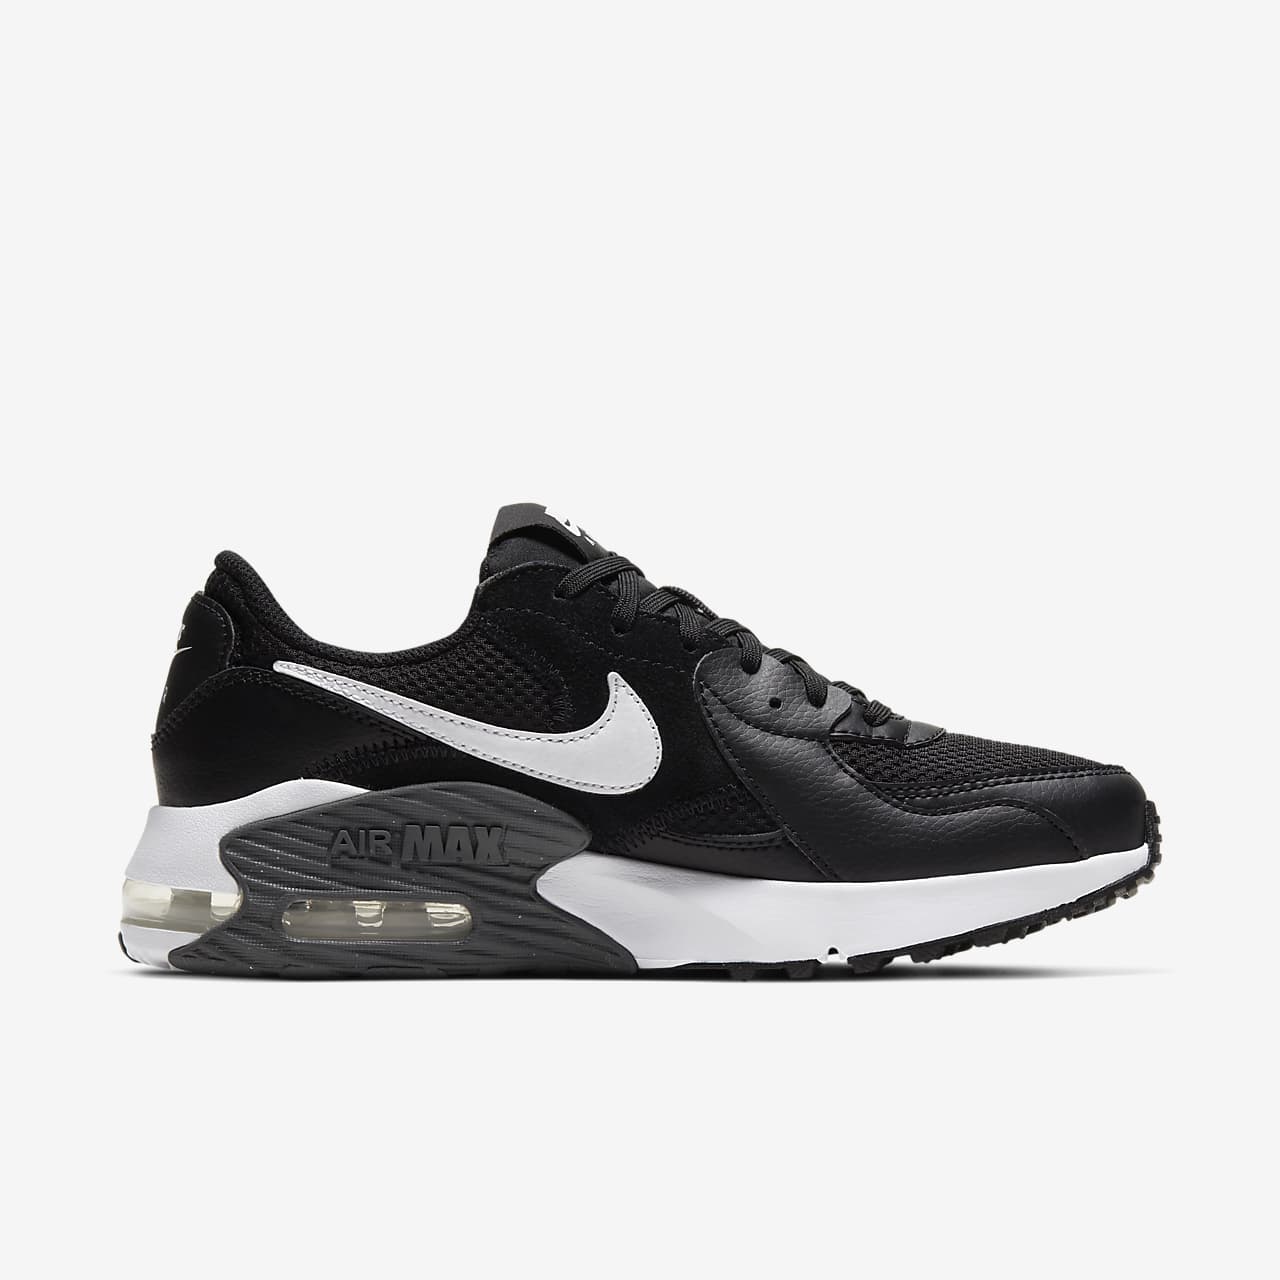 Nike Air Max Excee Women's Shoes صور بهبهاني